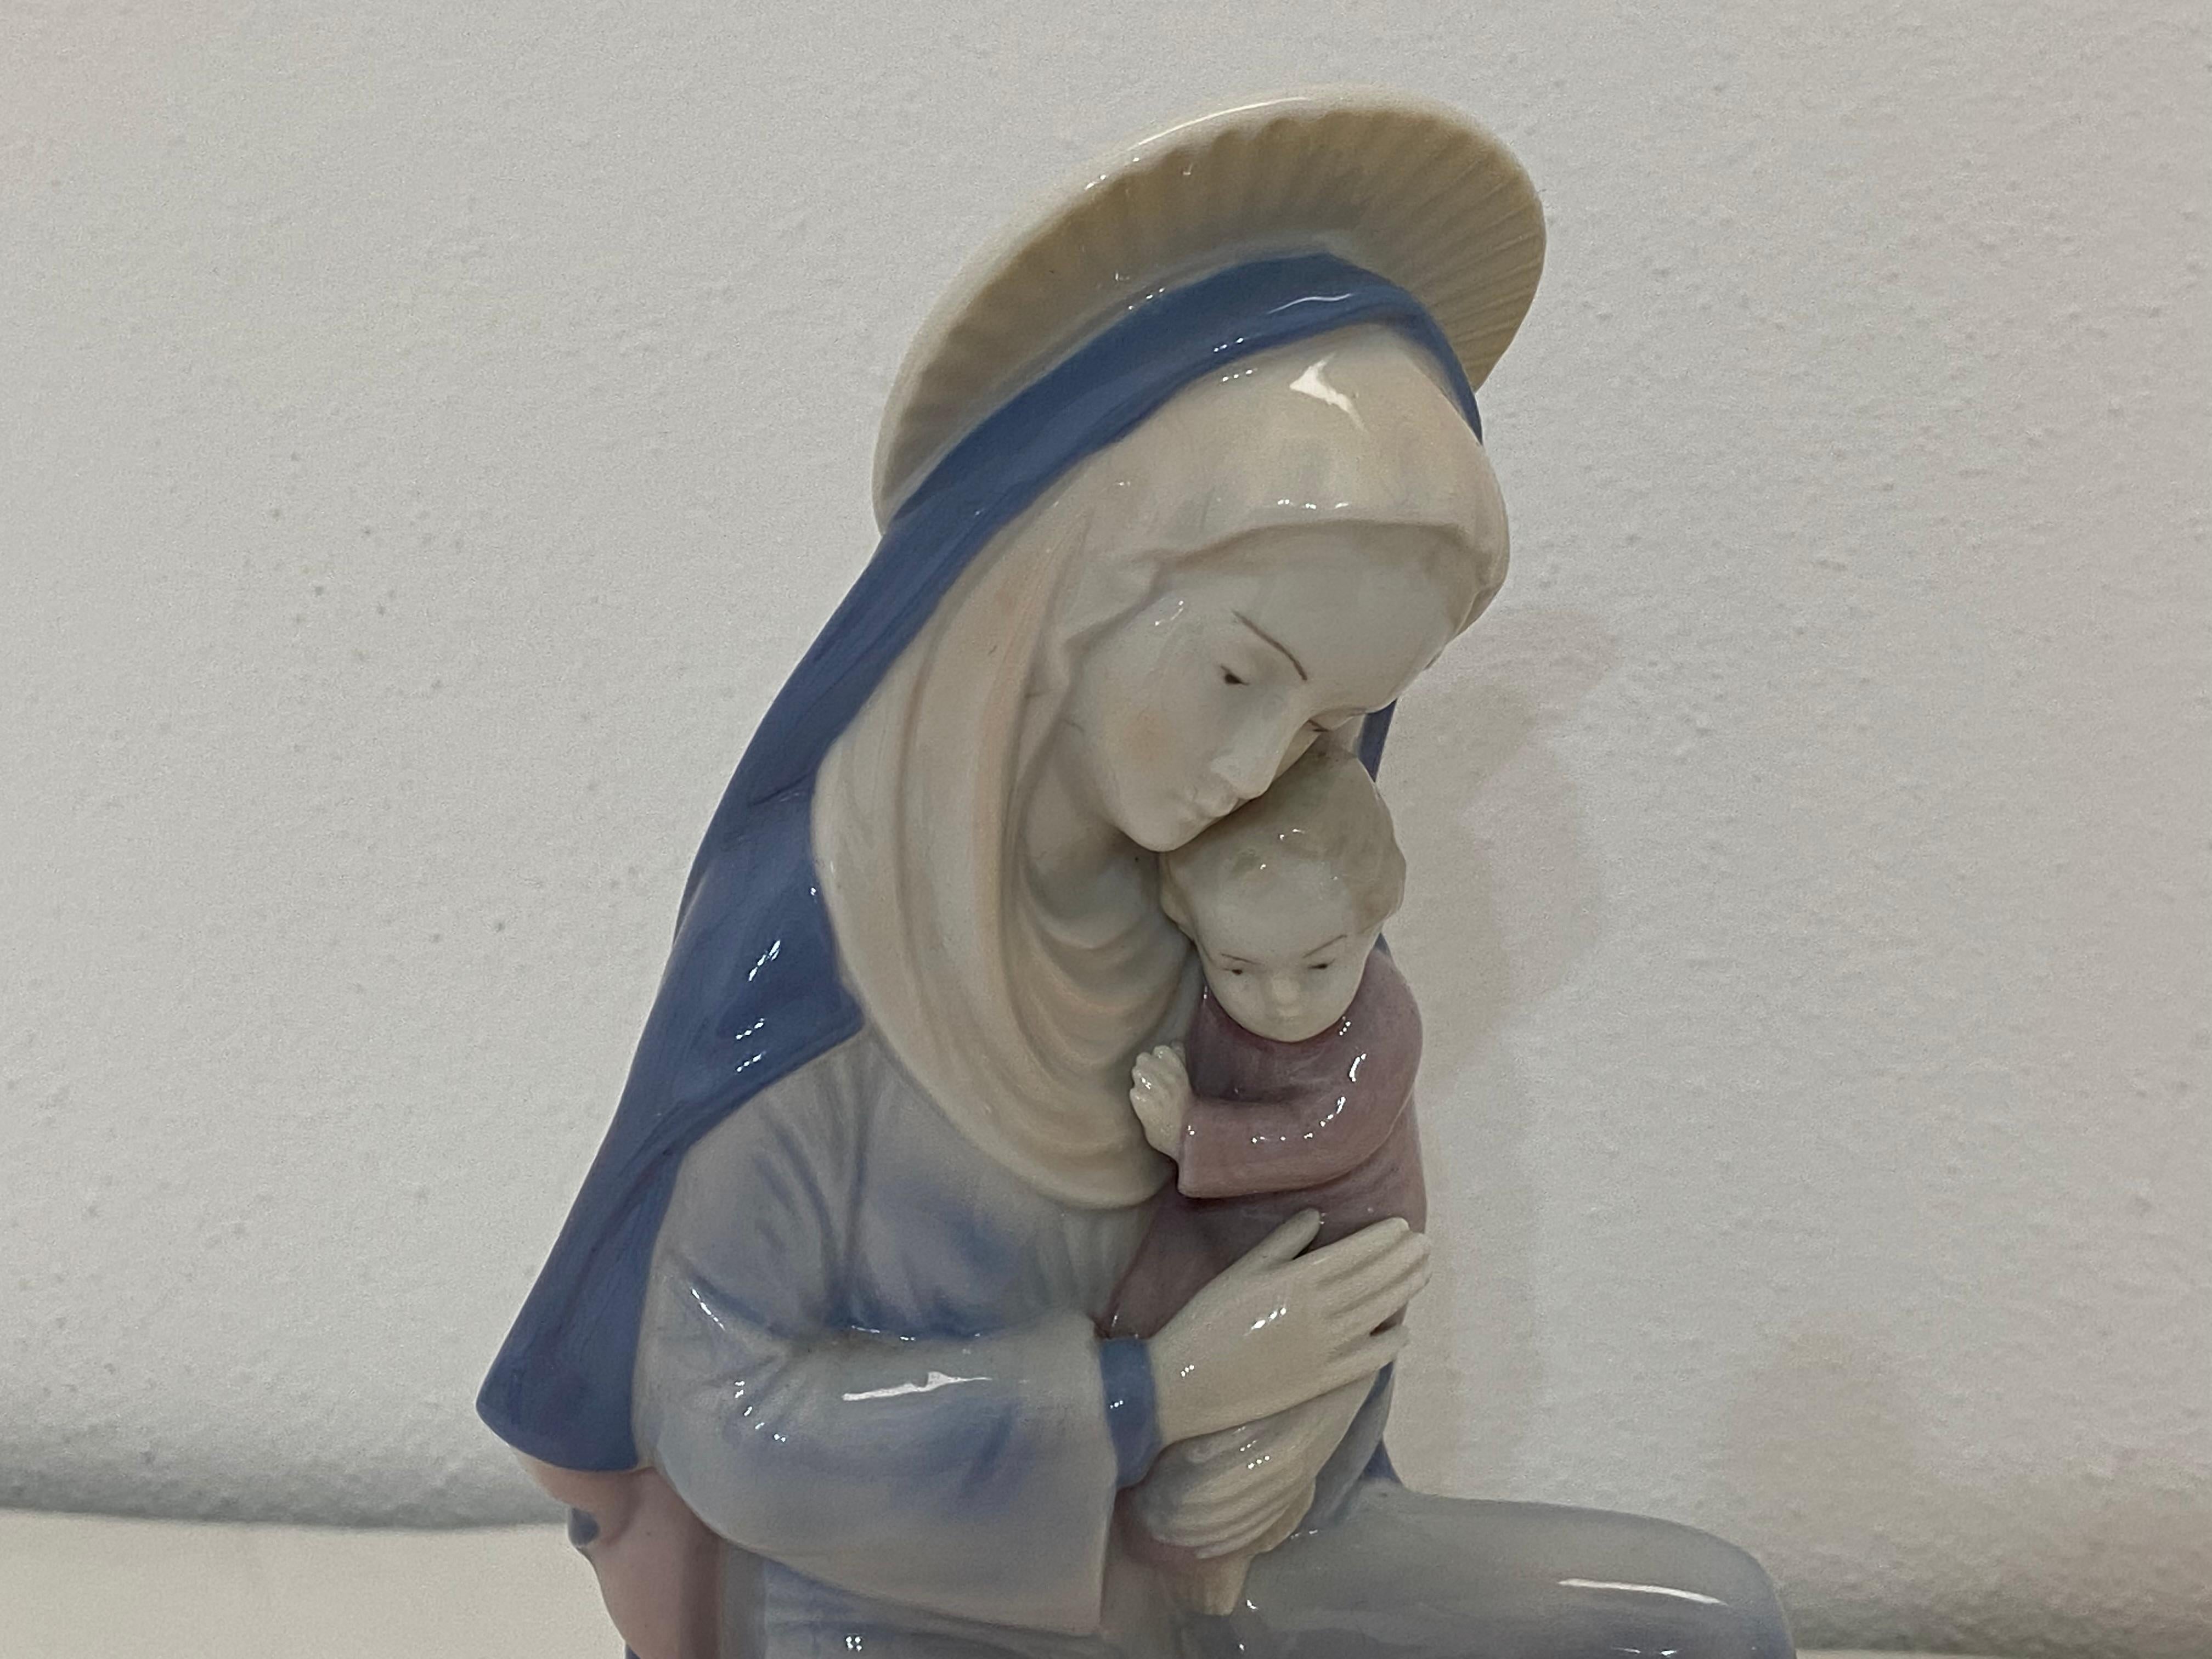 Madonna with Child. German porcelain from the 1990s.
22 cm high. 16 cm wide base. Excellent condition.
I ship in an elegant gift box.